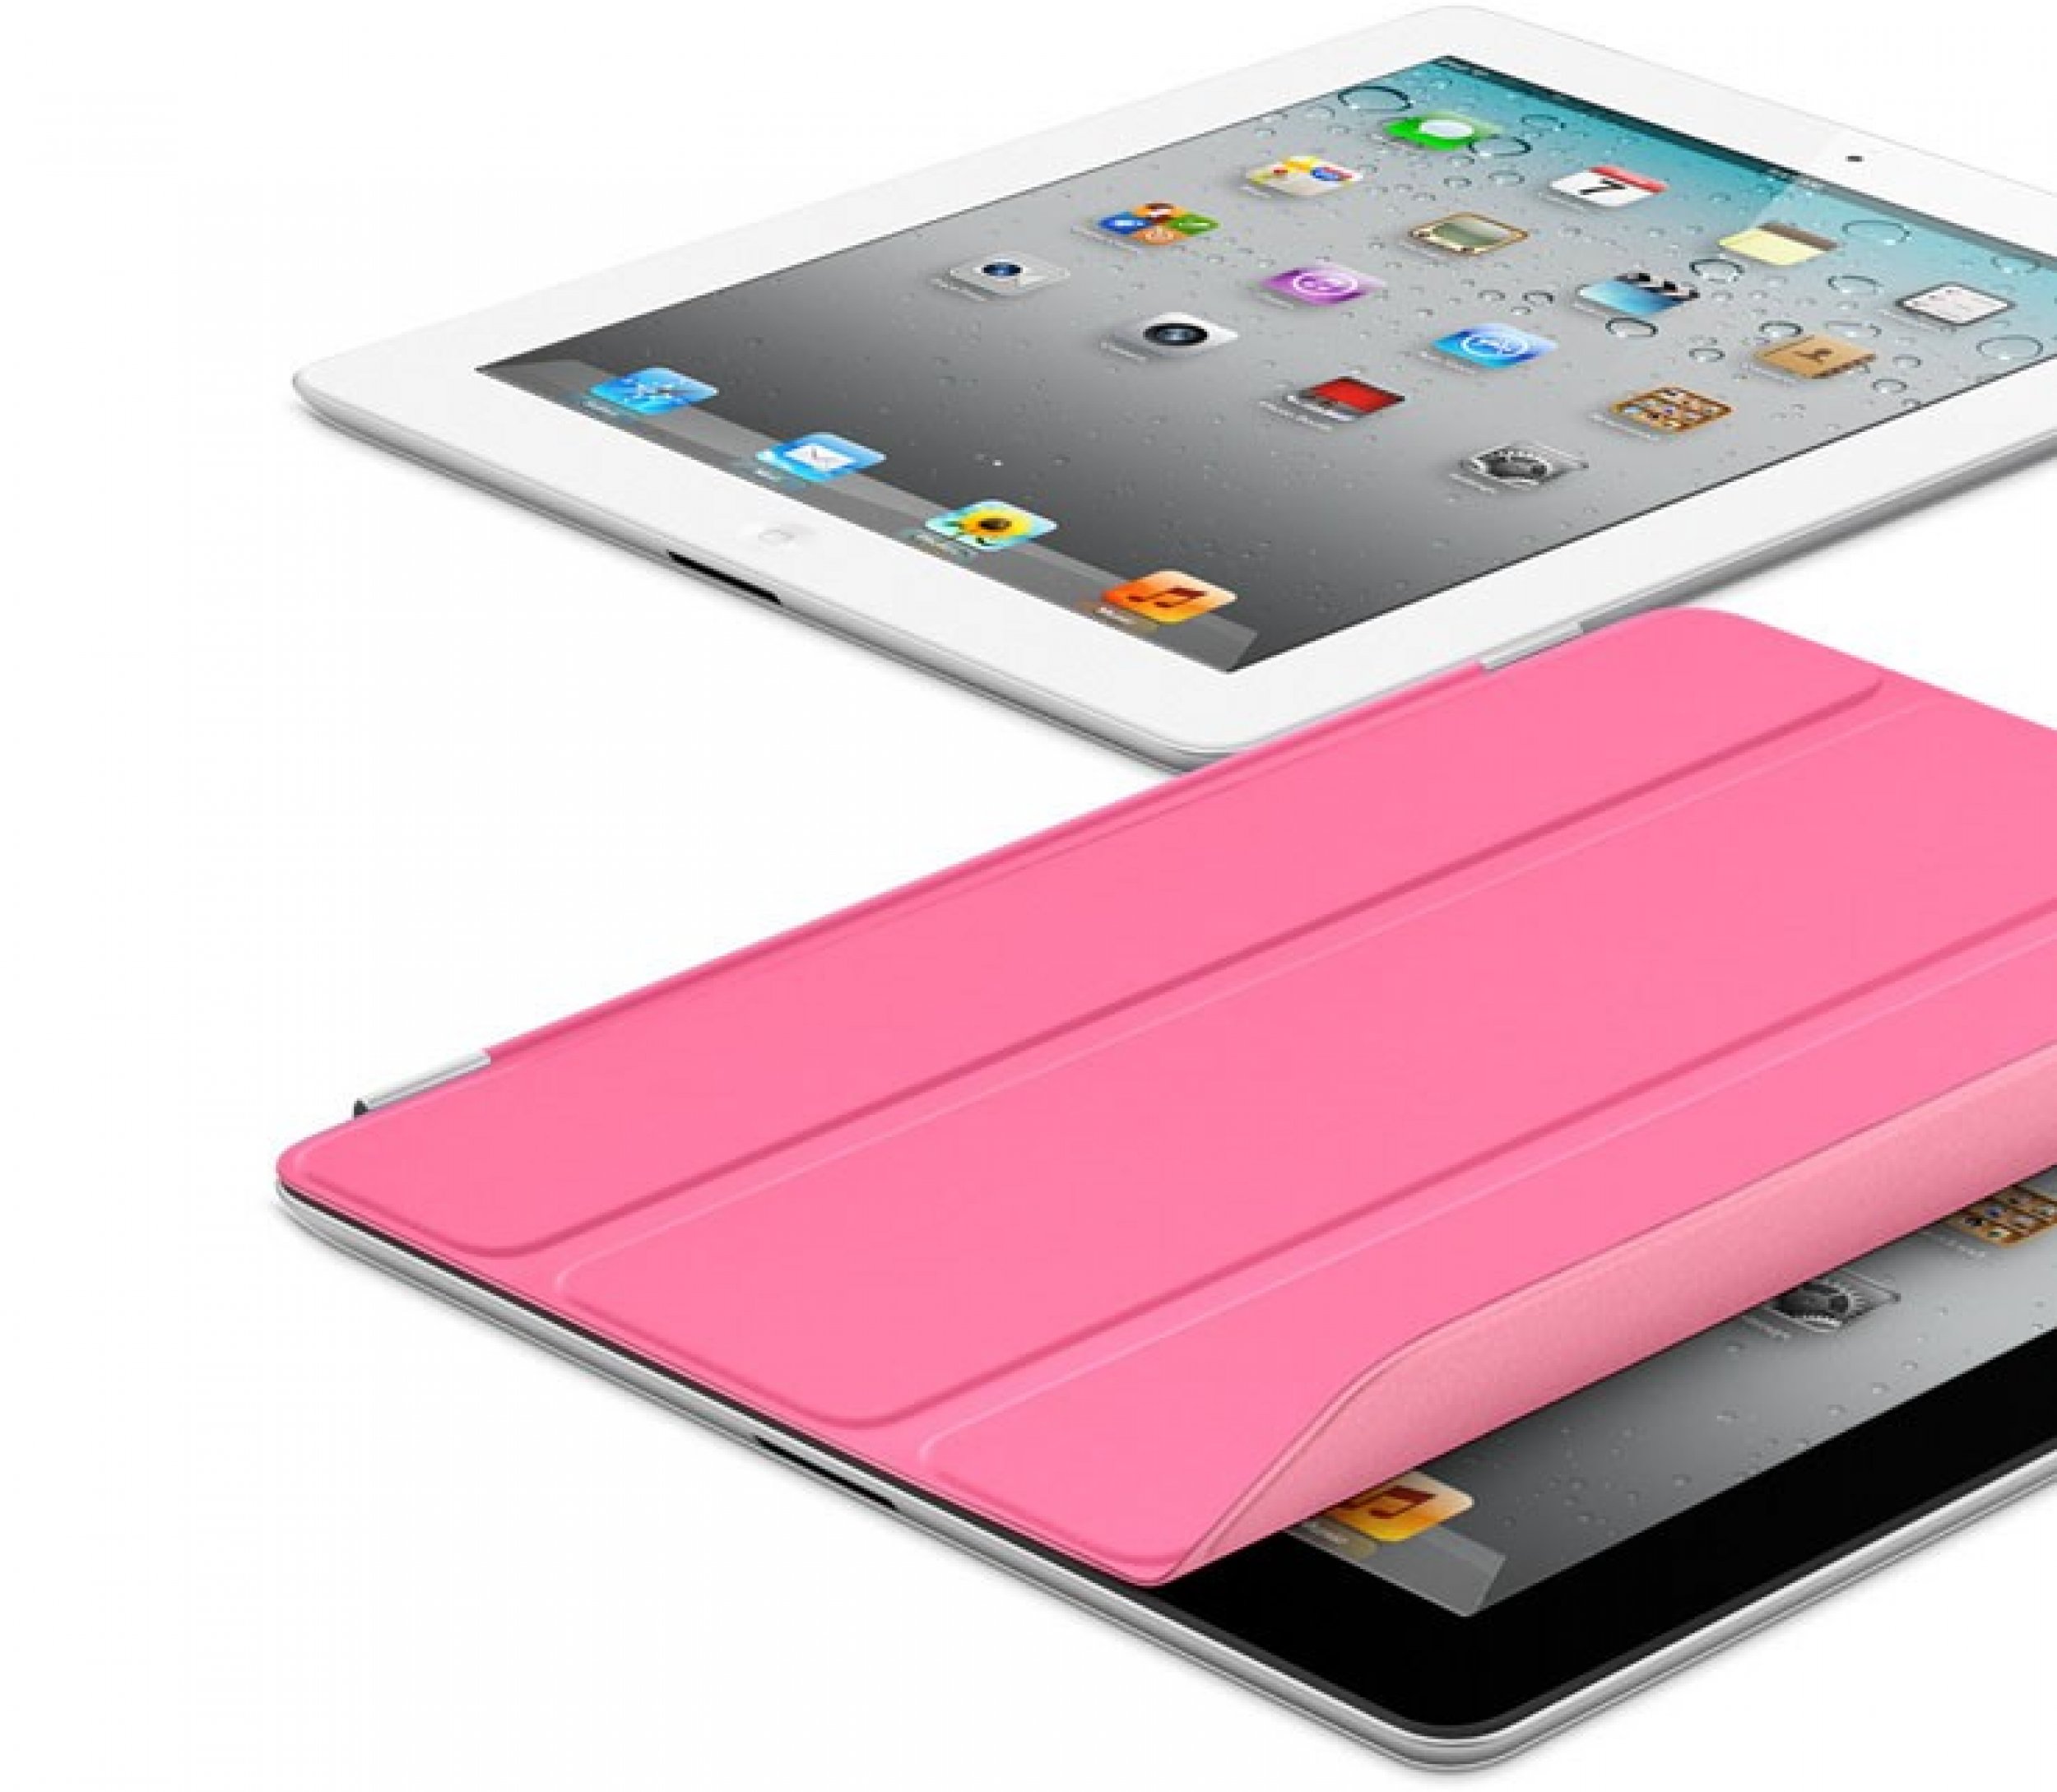 IPad 3 Release Date 2012 Apples New Tablet Cant Connect To Face Time on LTE, Has Always Been Wi-Fi Only